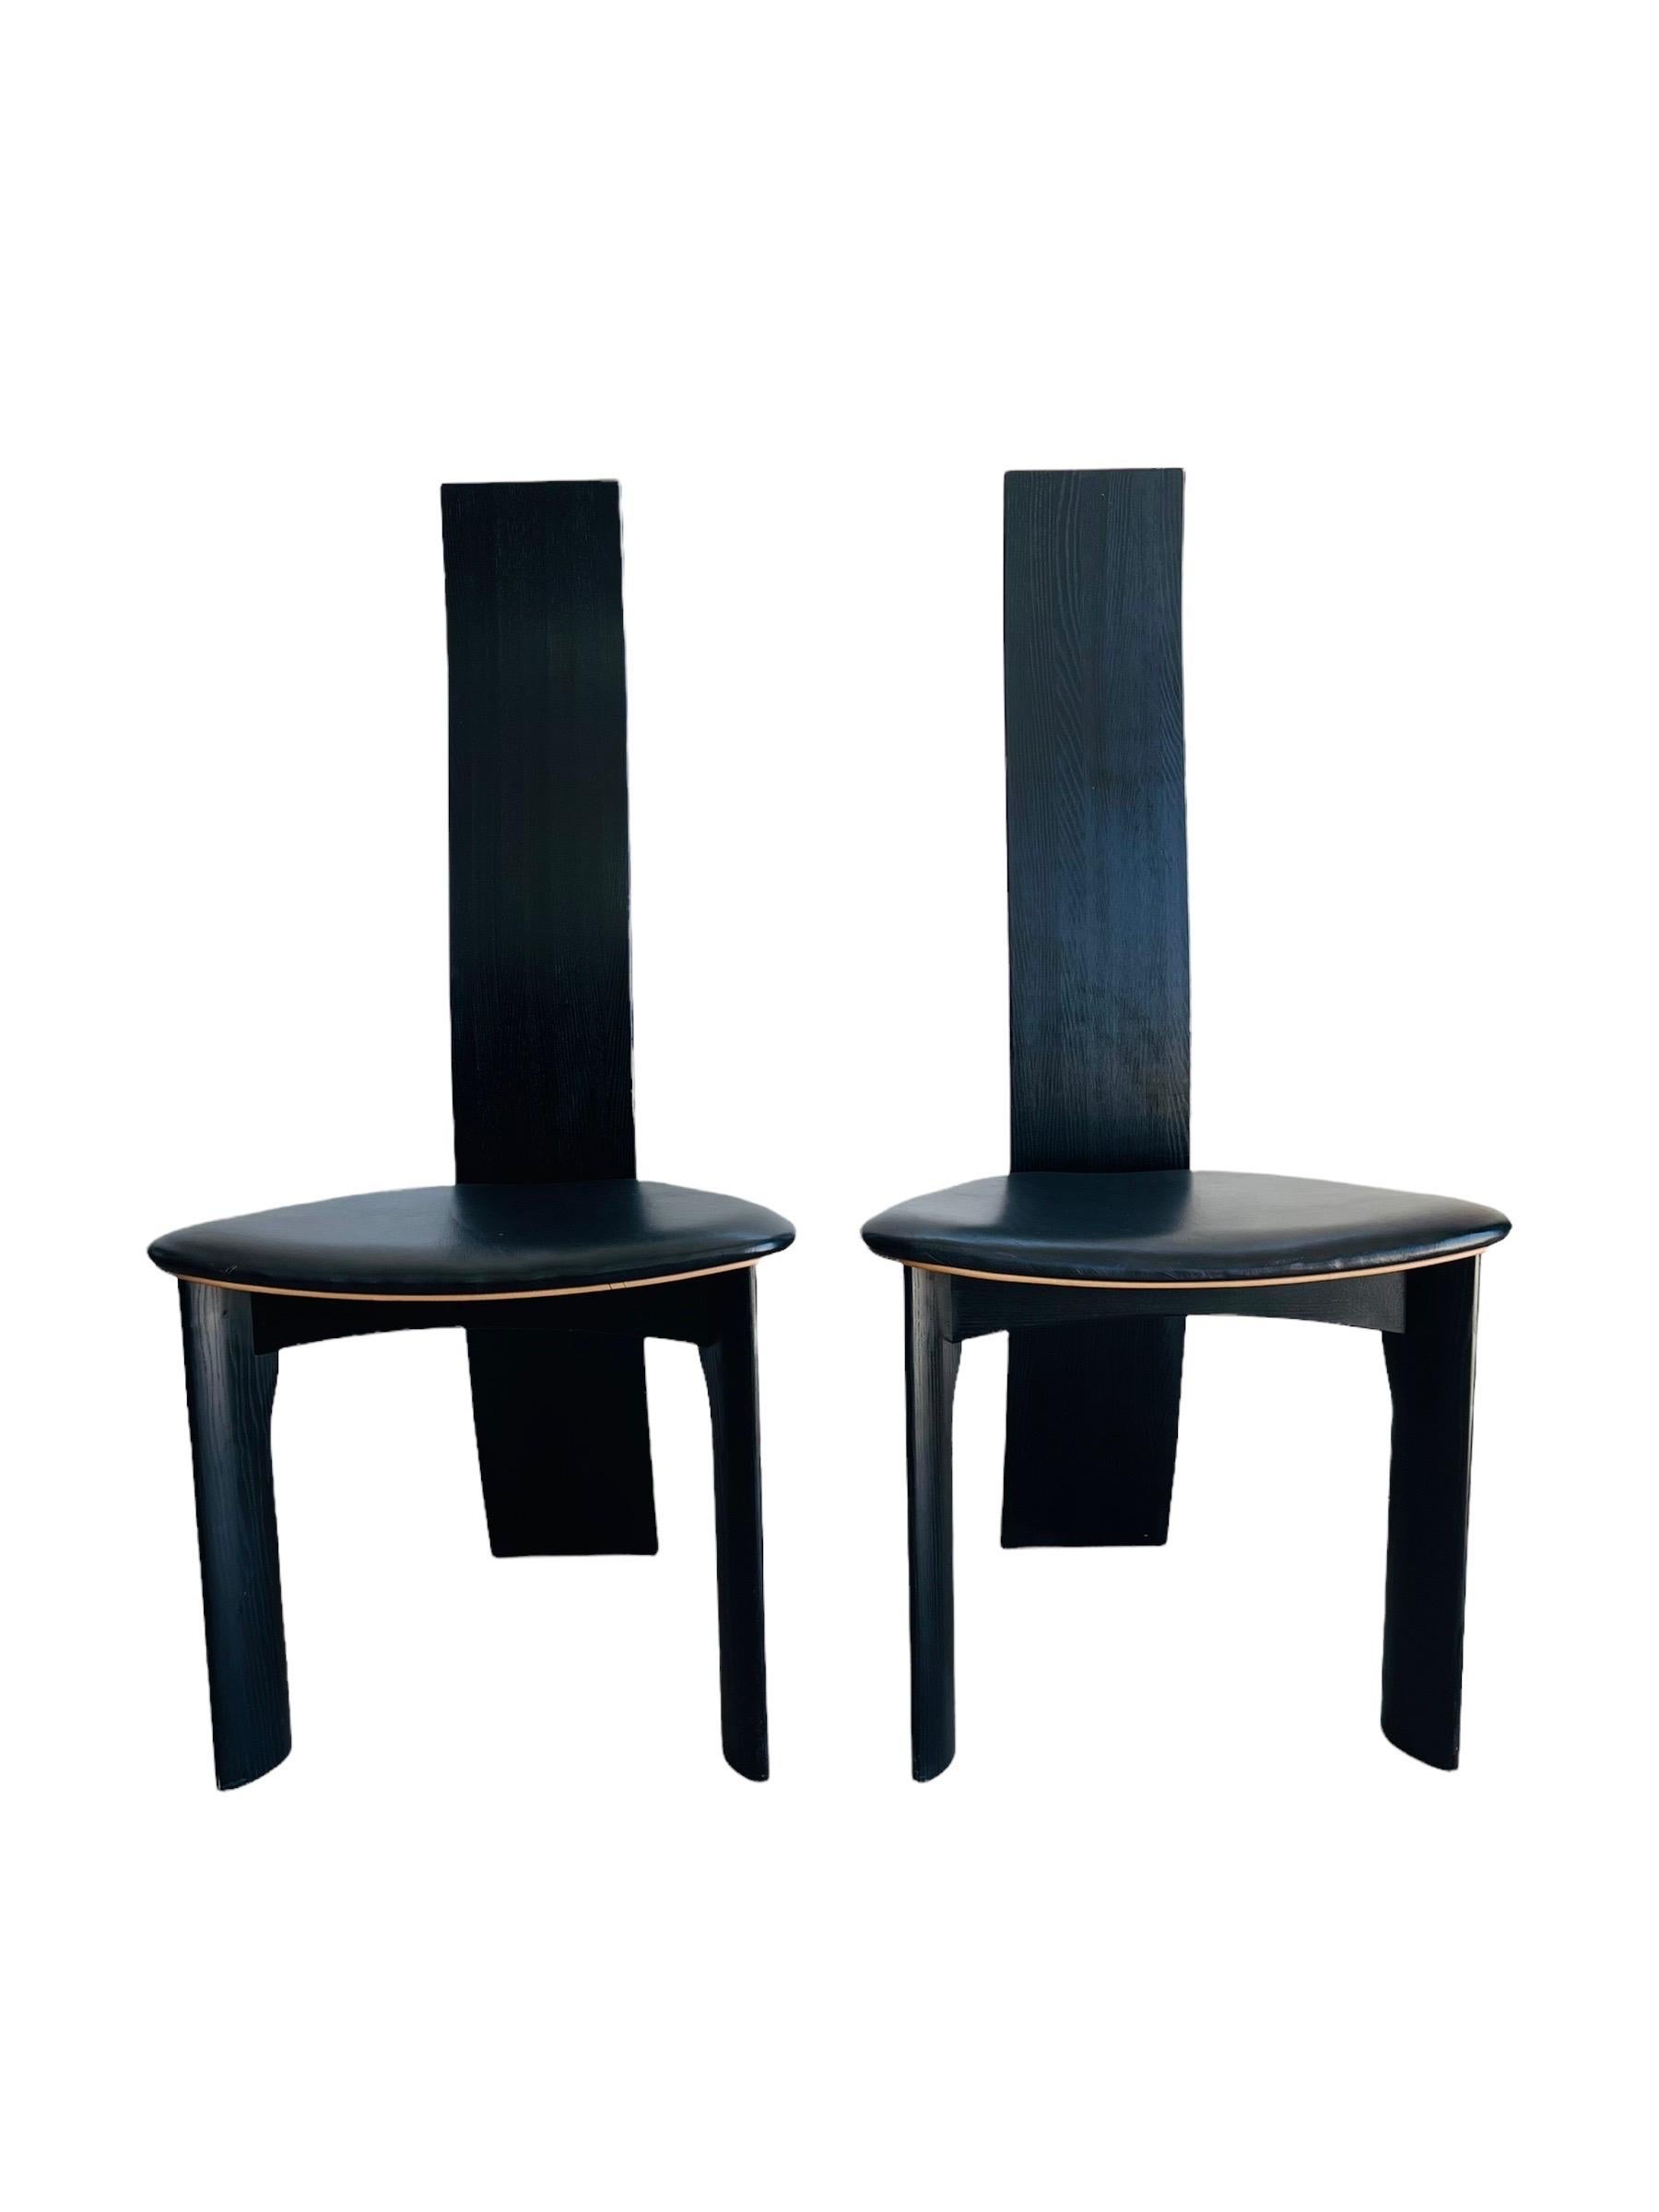 A set of six Danish ebonized dining chairs. Designed 1970 by Bob og Dries van den Bergh for Tranekær Mobler. The chairs are in good vintage condition with normal wear consistent with age and use. 

Measures: W 20.5” x D 18” x H 44” x SH 18”